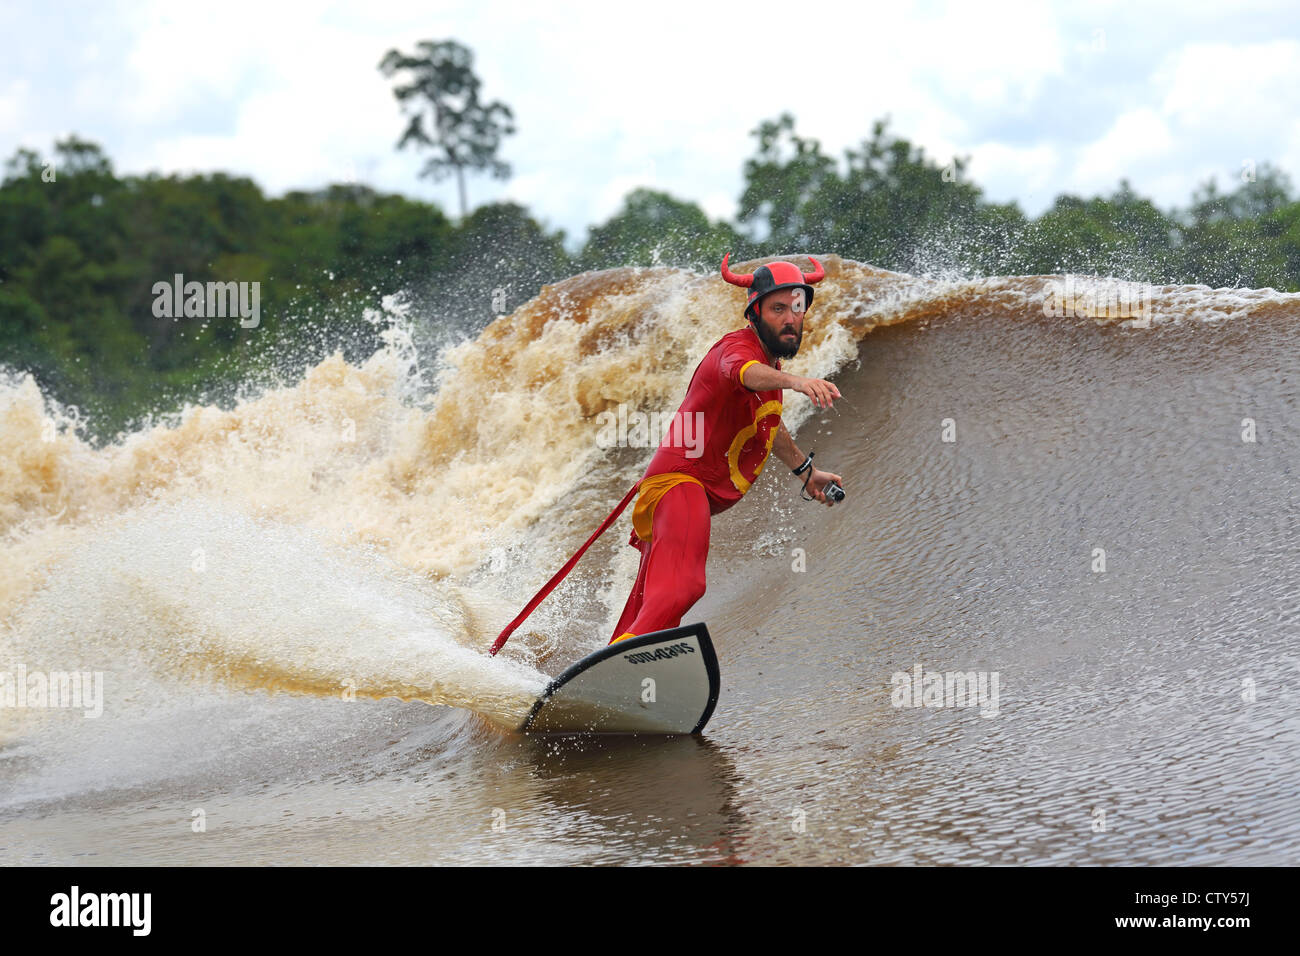 Surfer wearing red superhero costume surfing a tidal river bore wave known locally as the Bono or 7 Ghosts by traveling surfers. Stock Photo